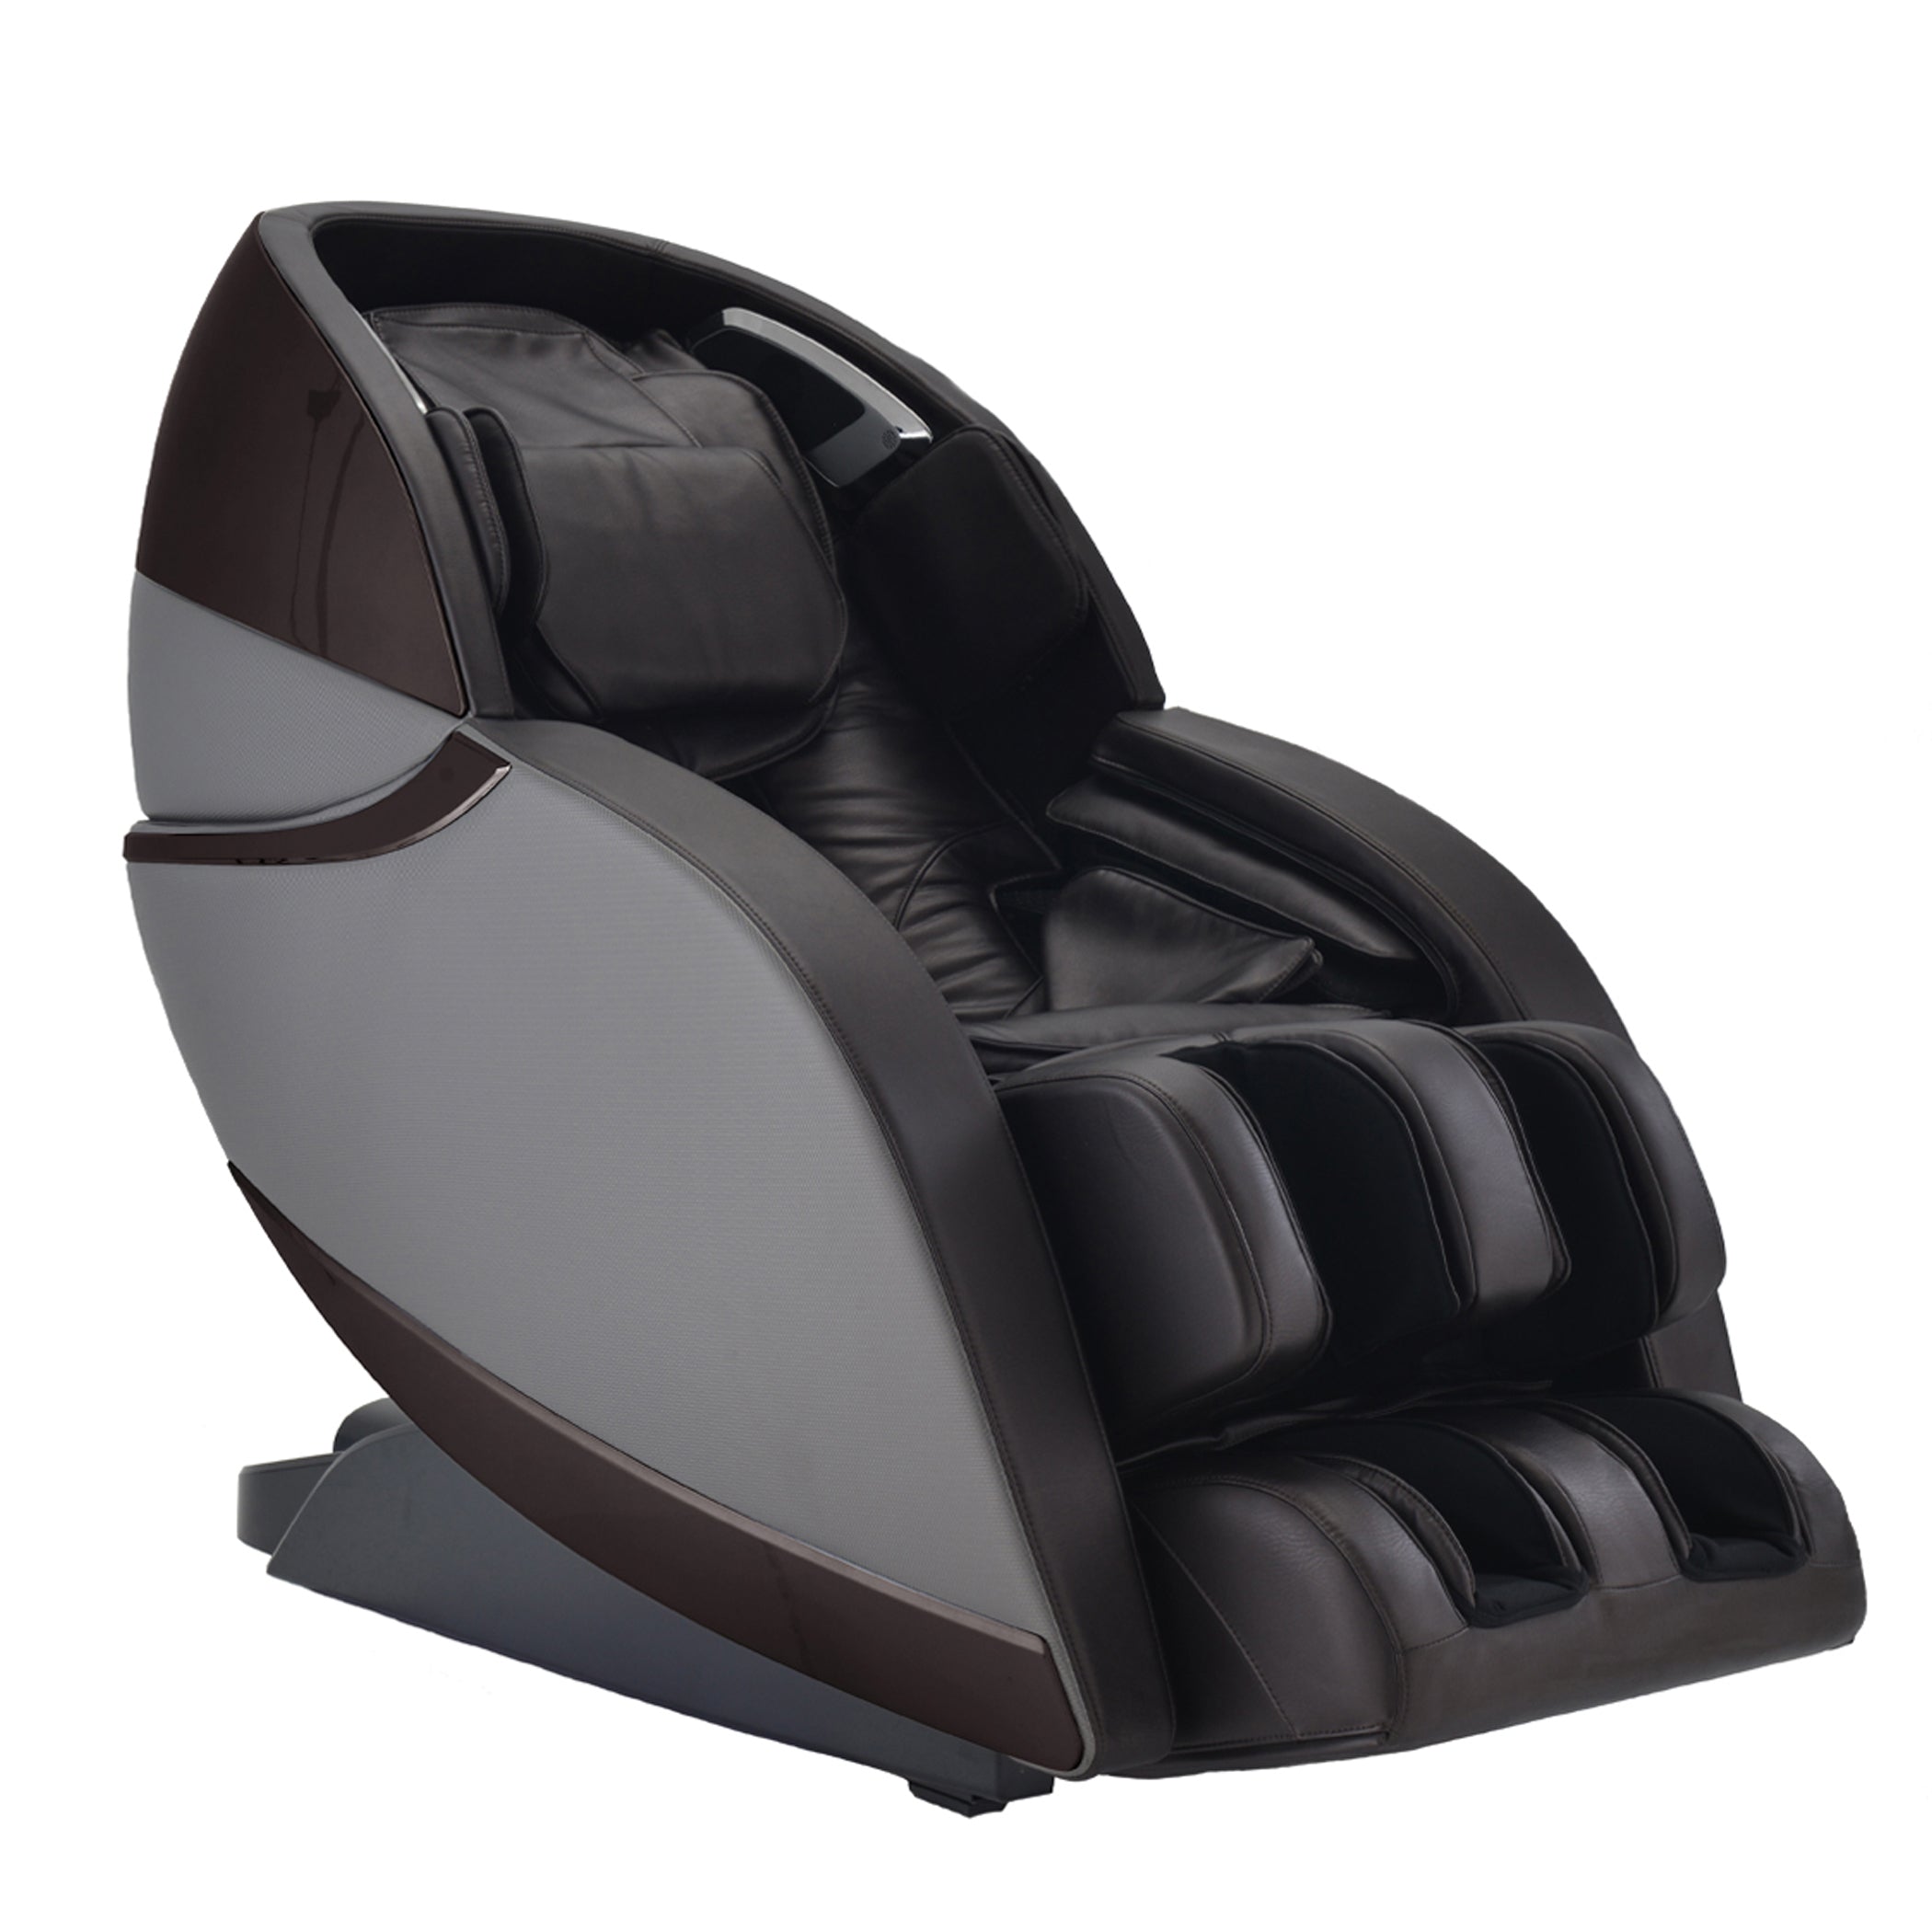 Infinity Evolution Massage Chair Certified Pre-Owned Model | Grade A - Pristine Home & Wellness